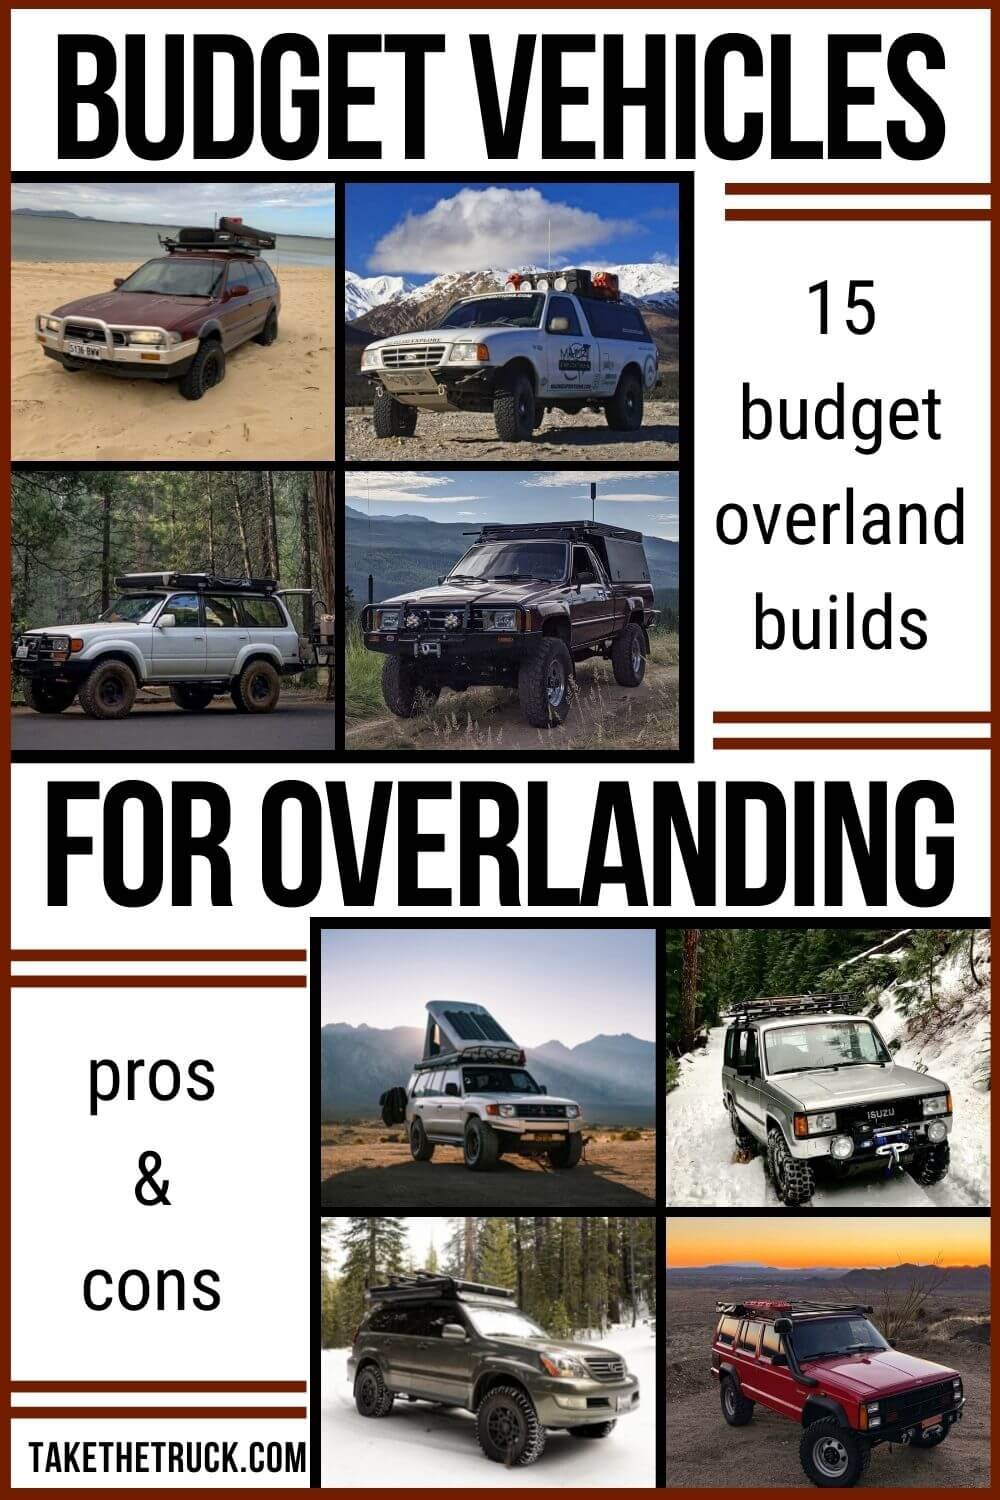 Fifteen budget overland vehicle options if you’re overlanding on a budget. Cheap overland vehicles with great budget overland build ideas to help you start your overlanding adventures today!